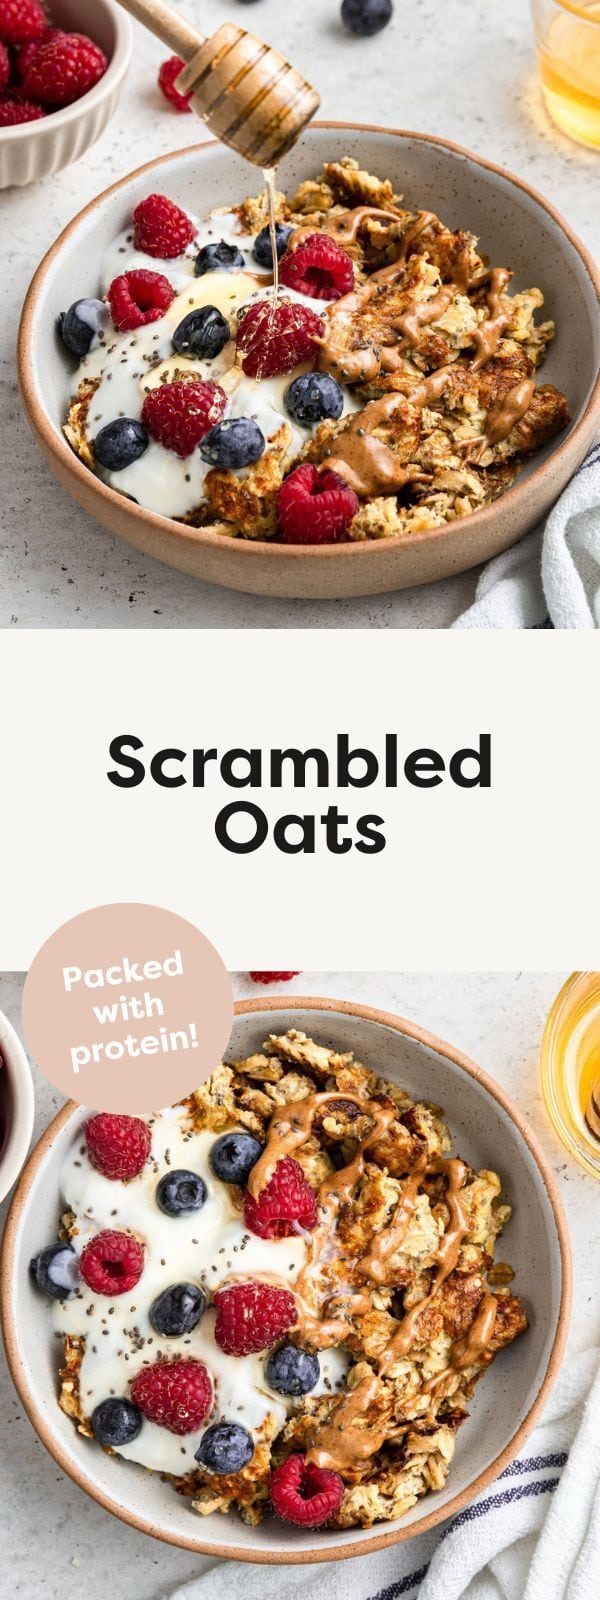 Two photos of scrambled oats. The top one has honey drizzling over the scrambled oats bowl and the bottom one is just scrambled oats with yogurt and berries.